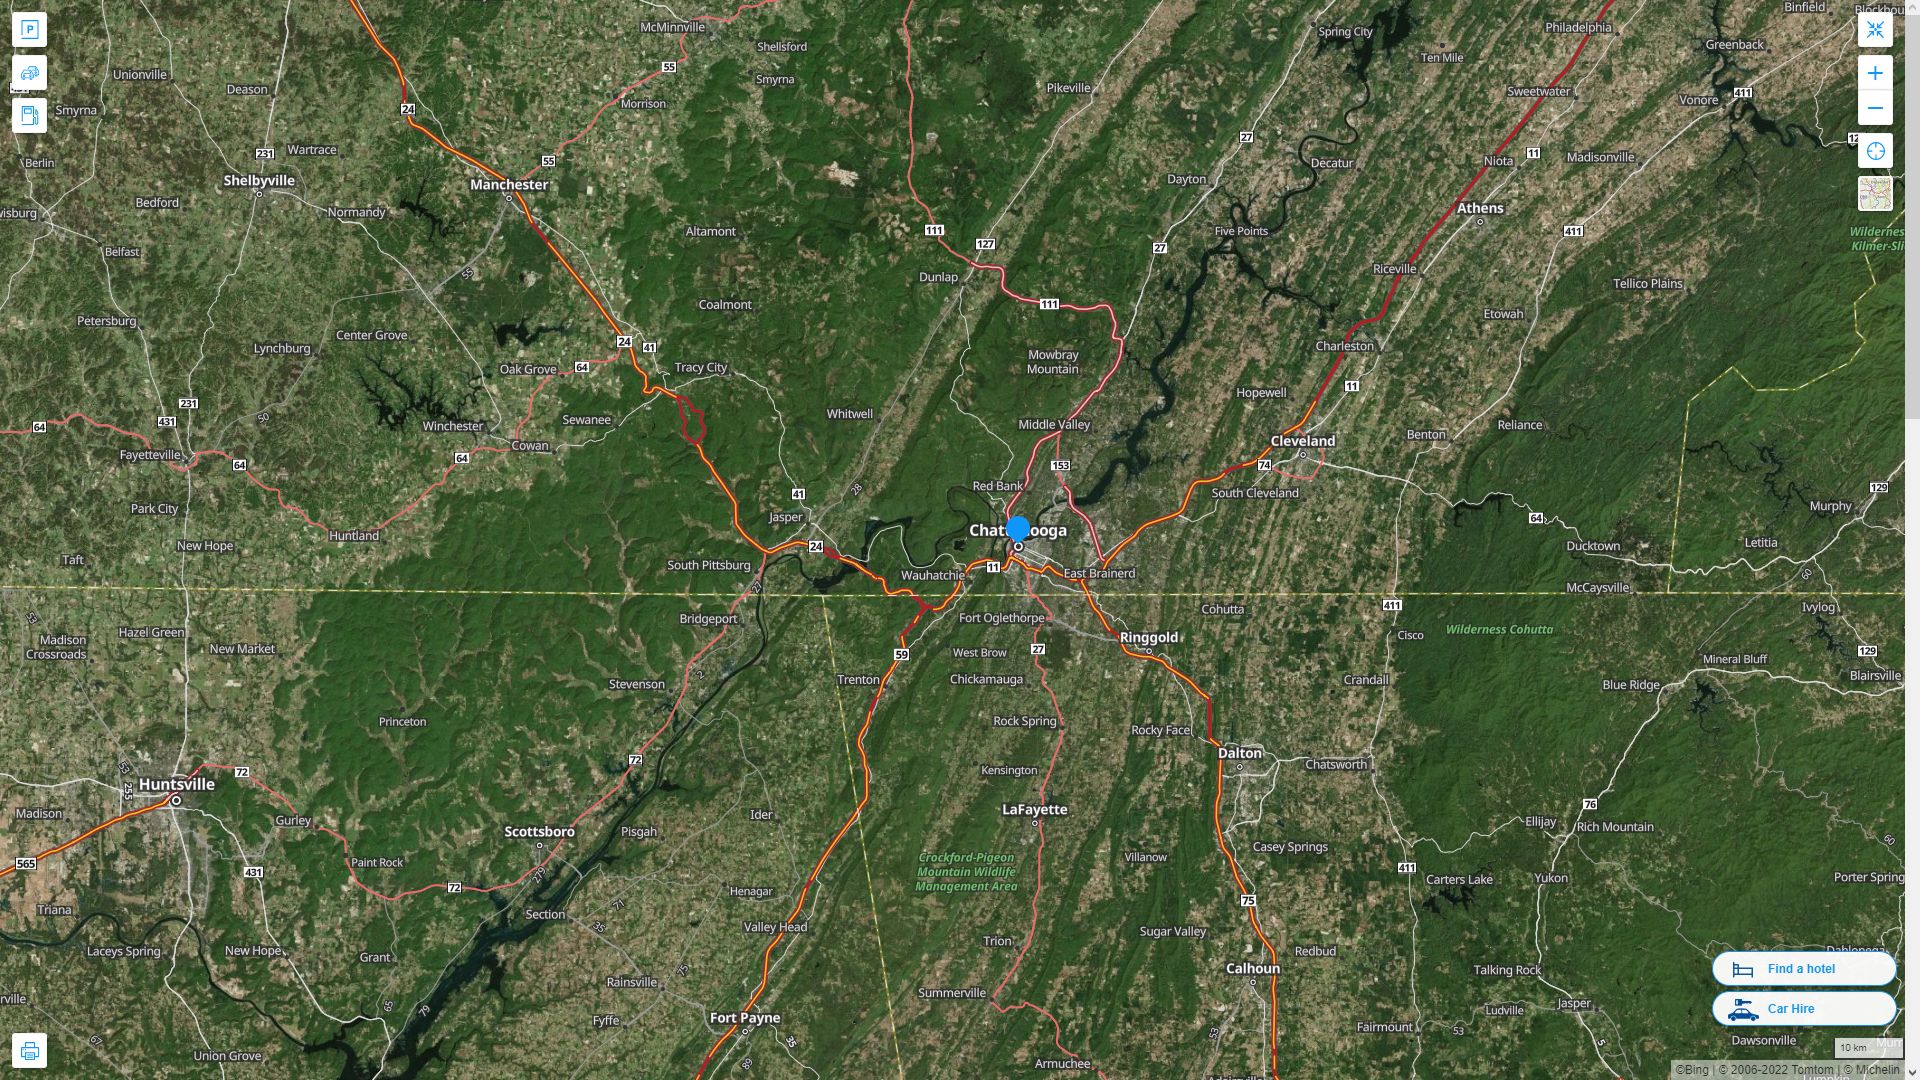 Chattanooga Tennessee Highway and Road Map with Satellite View